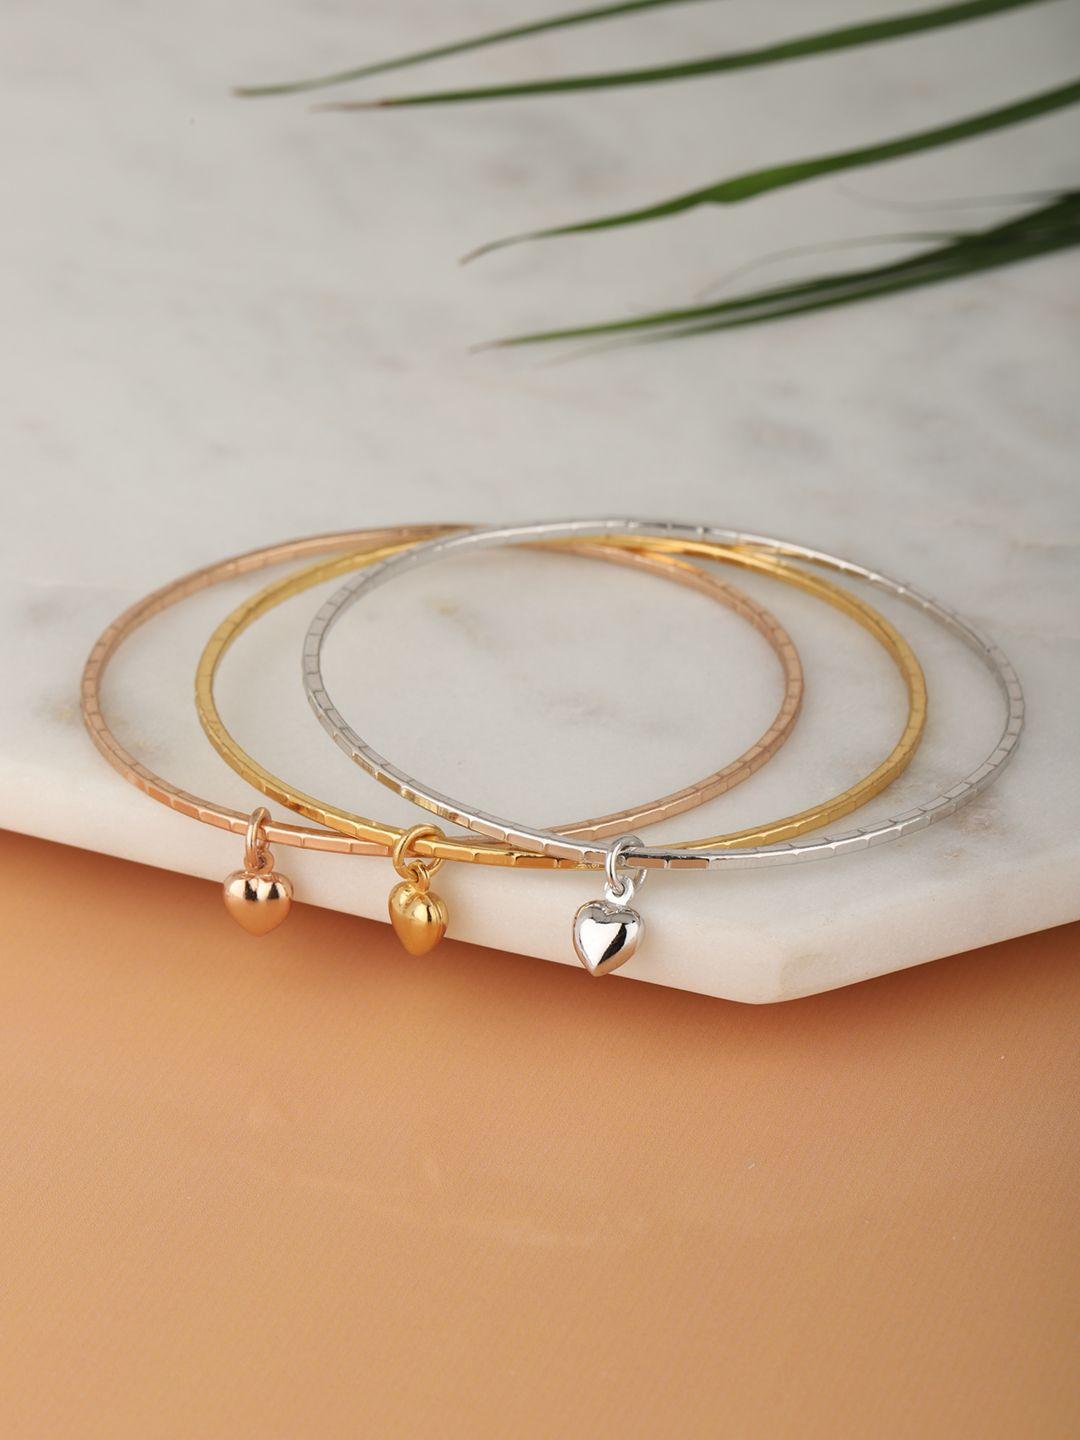 carlton-london-set-of-3-gold-plated-heart-shaped-stackable-bangles